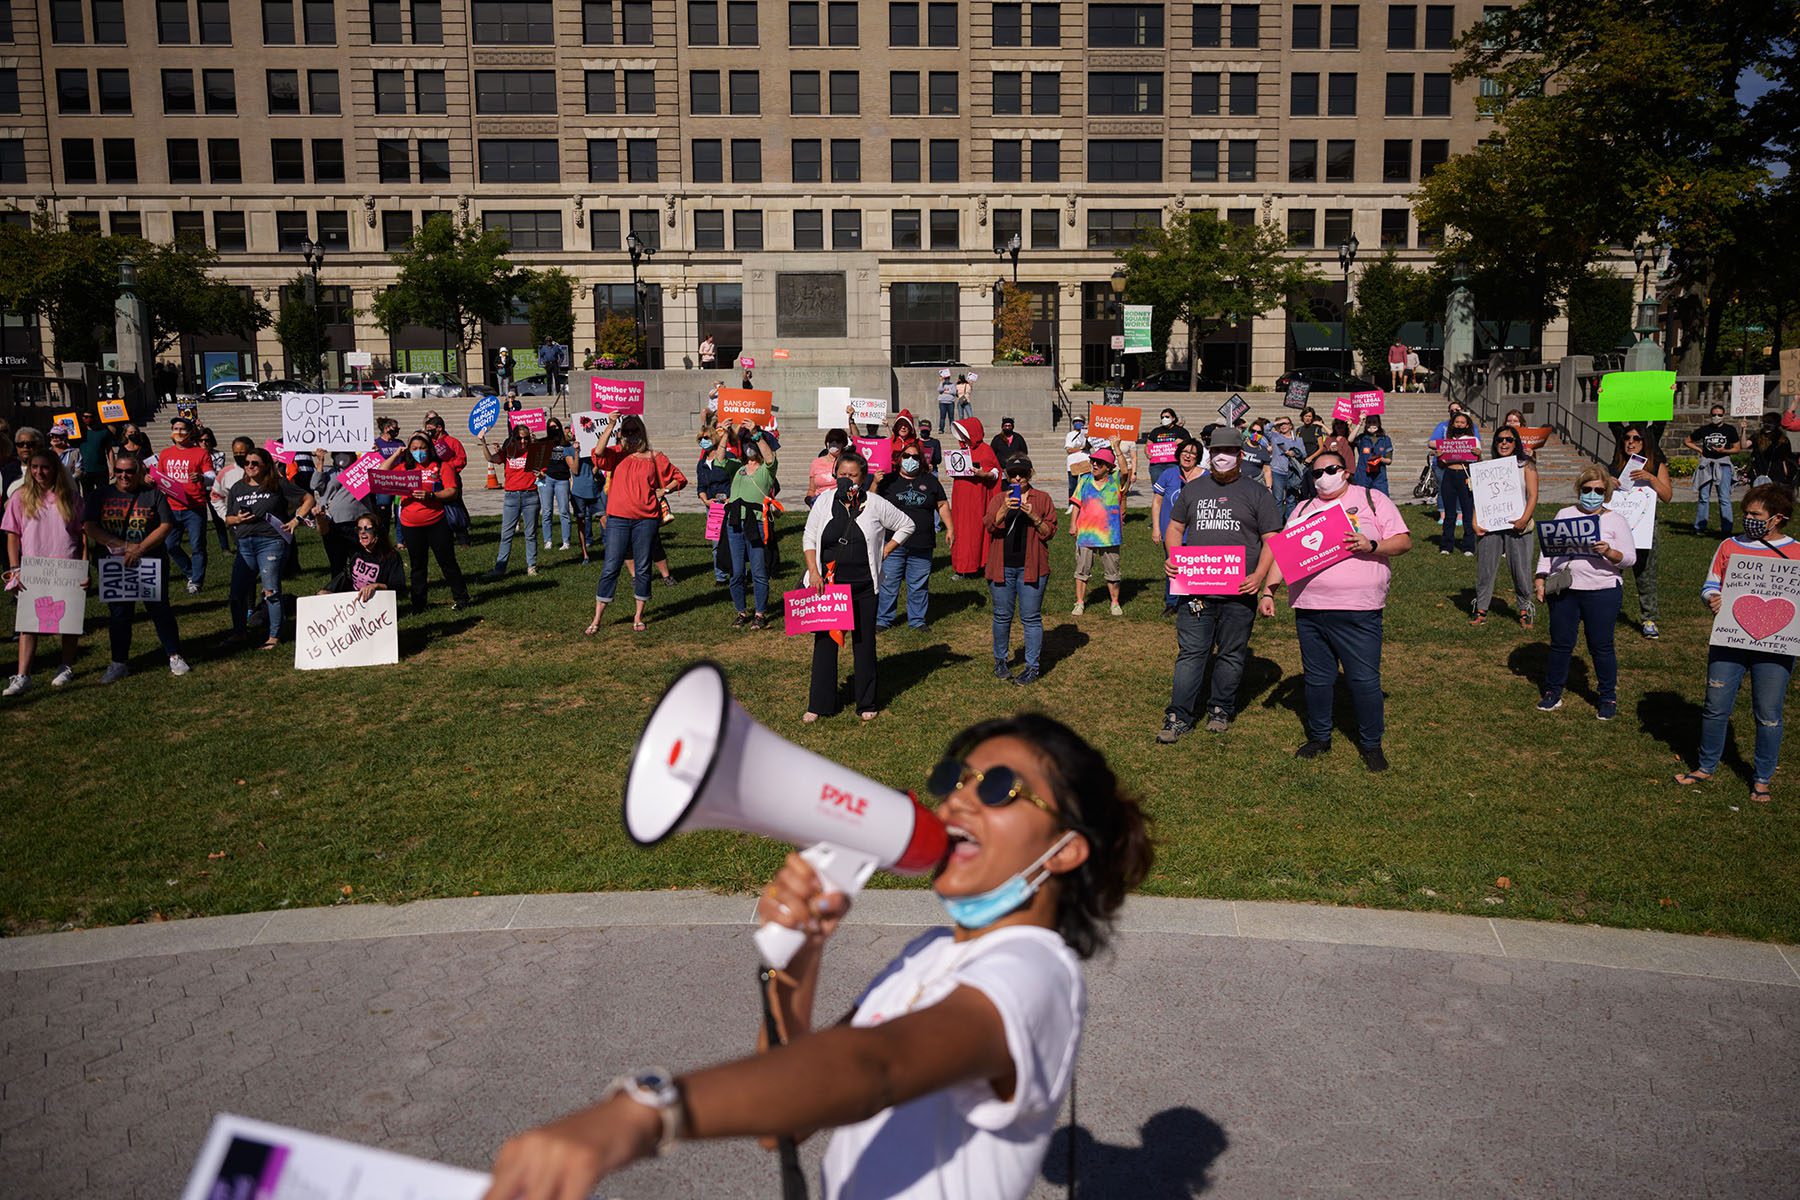 A protesters speaks into a megaphone in the foreground. In the background, people hold signs that read "Together we fight for all" and "Abortion is healthcare."